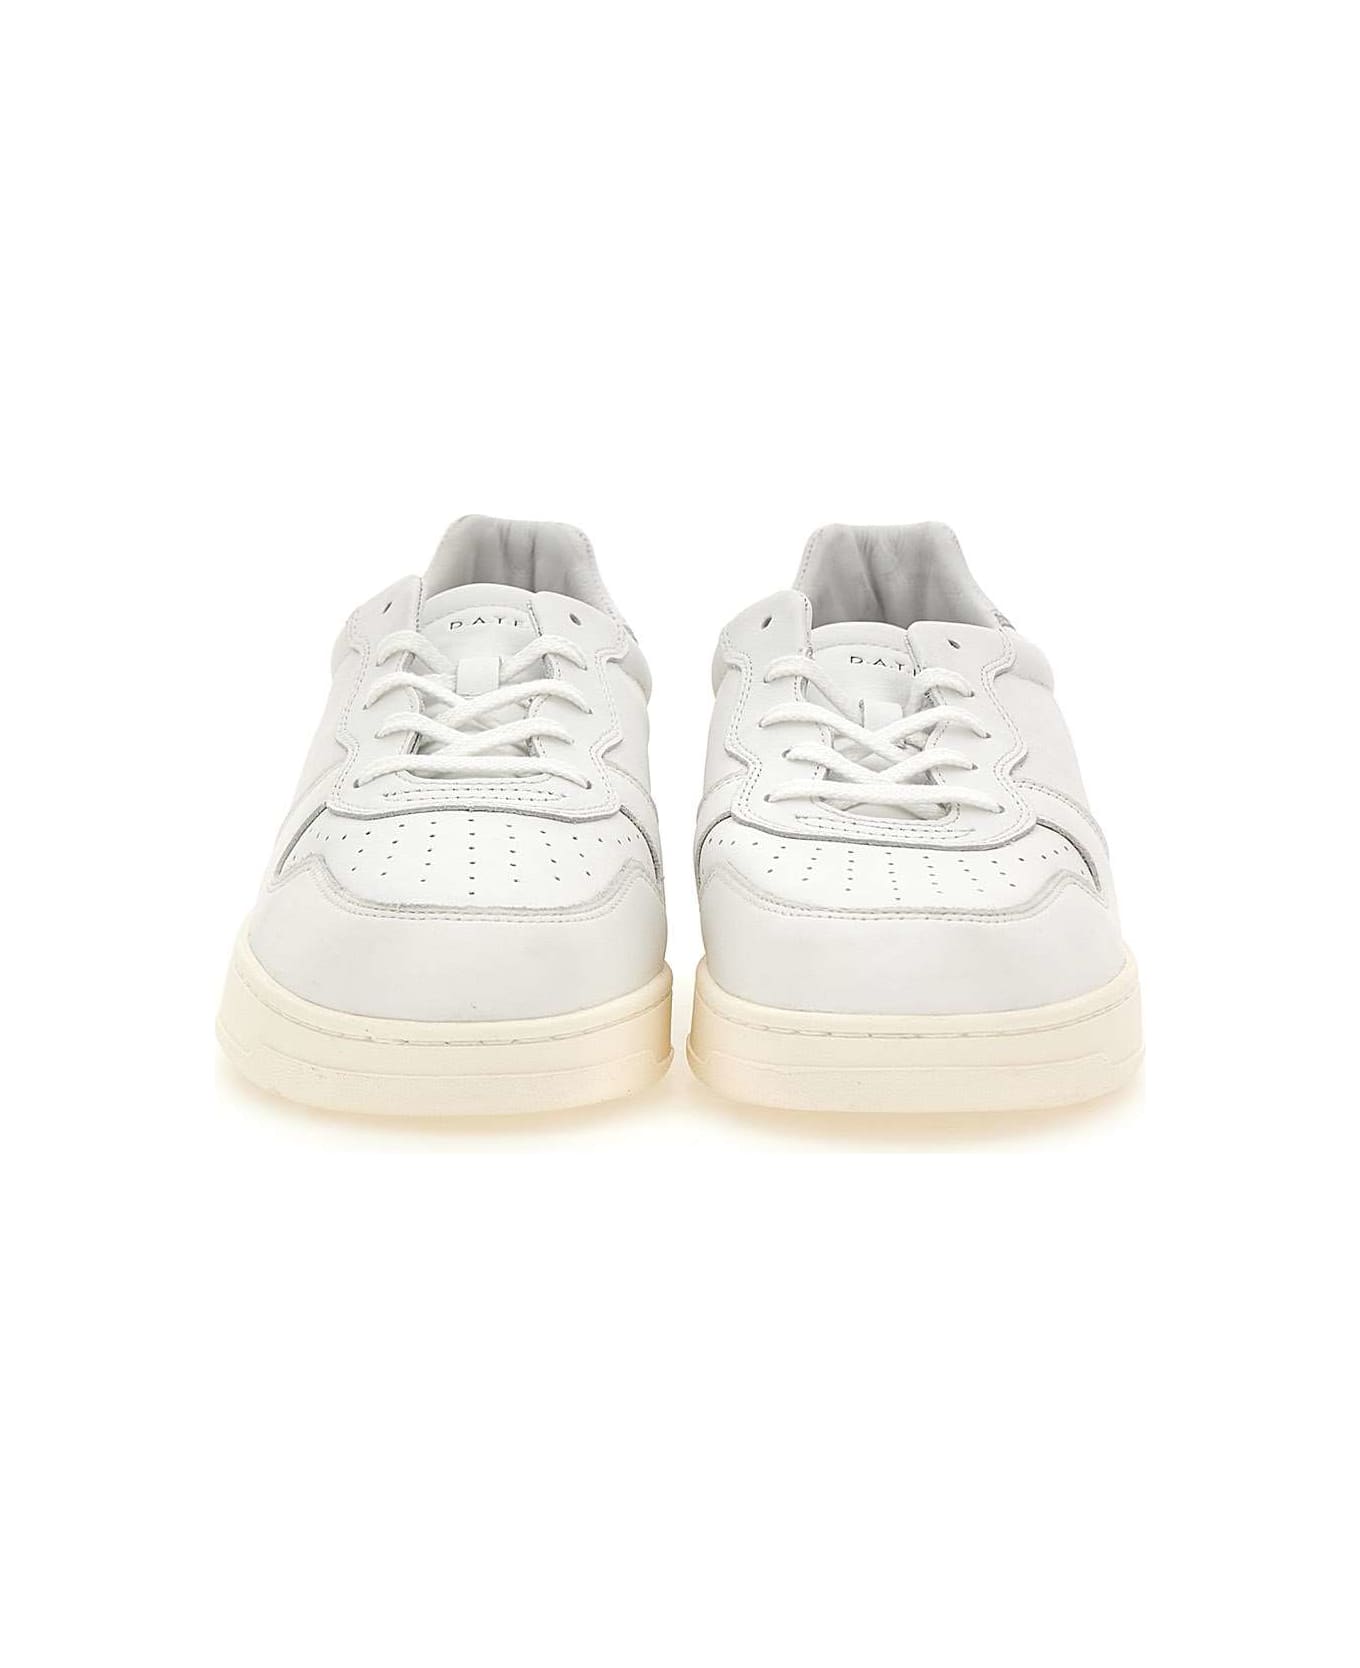 D.A.T.E. "court Calf" Leather Sneakers - WHITE